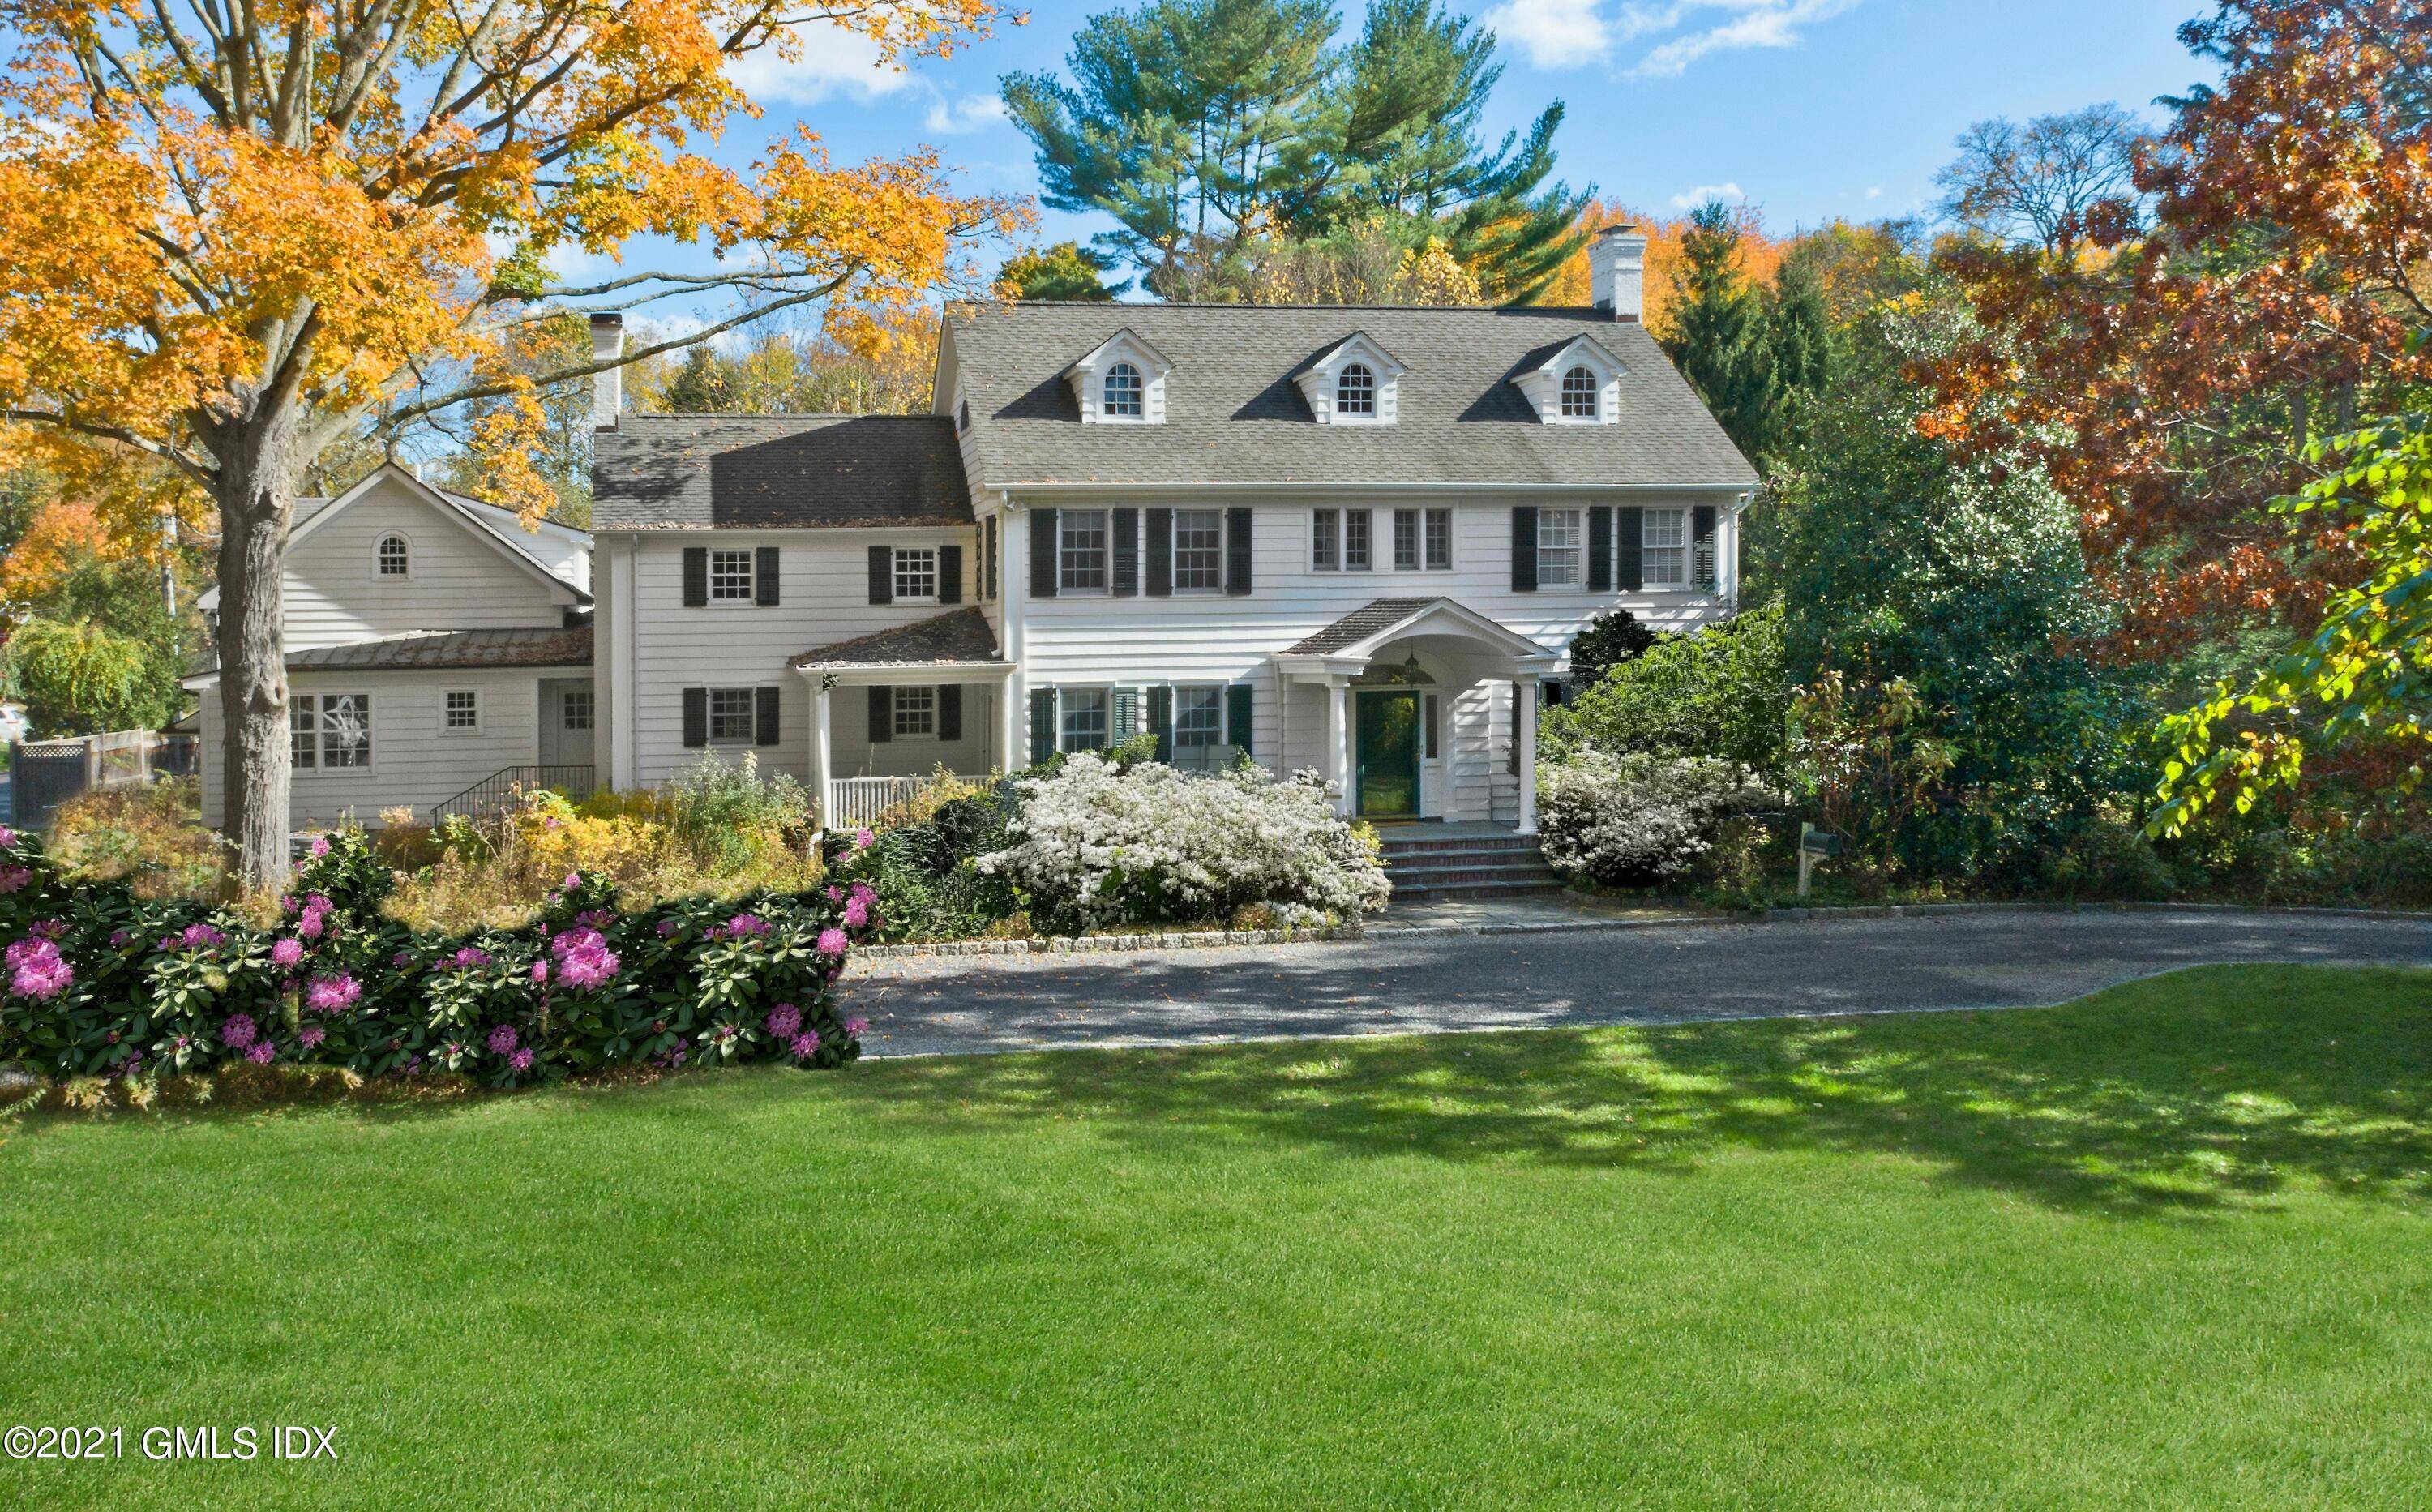 Greeted by stone pillars circular driveway this classic colonial w elegant spaces beautifully blends w casual living.